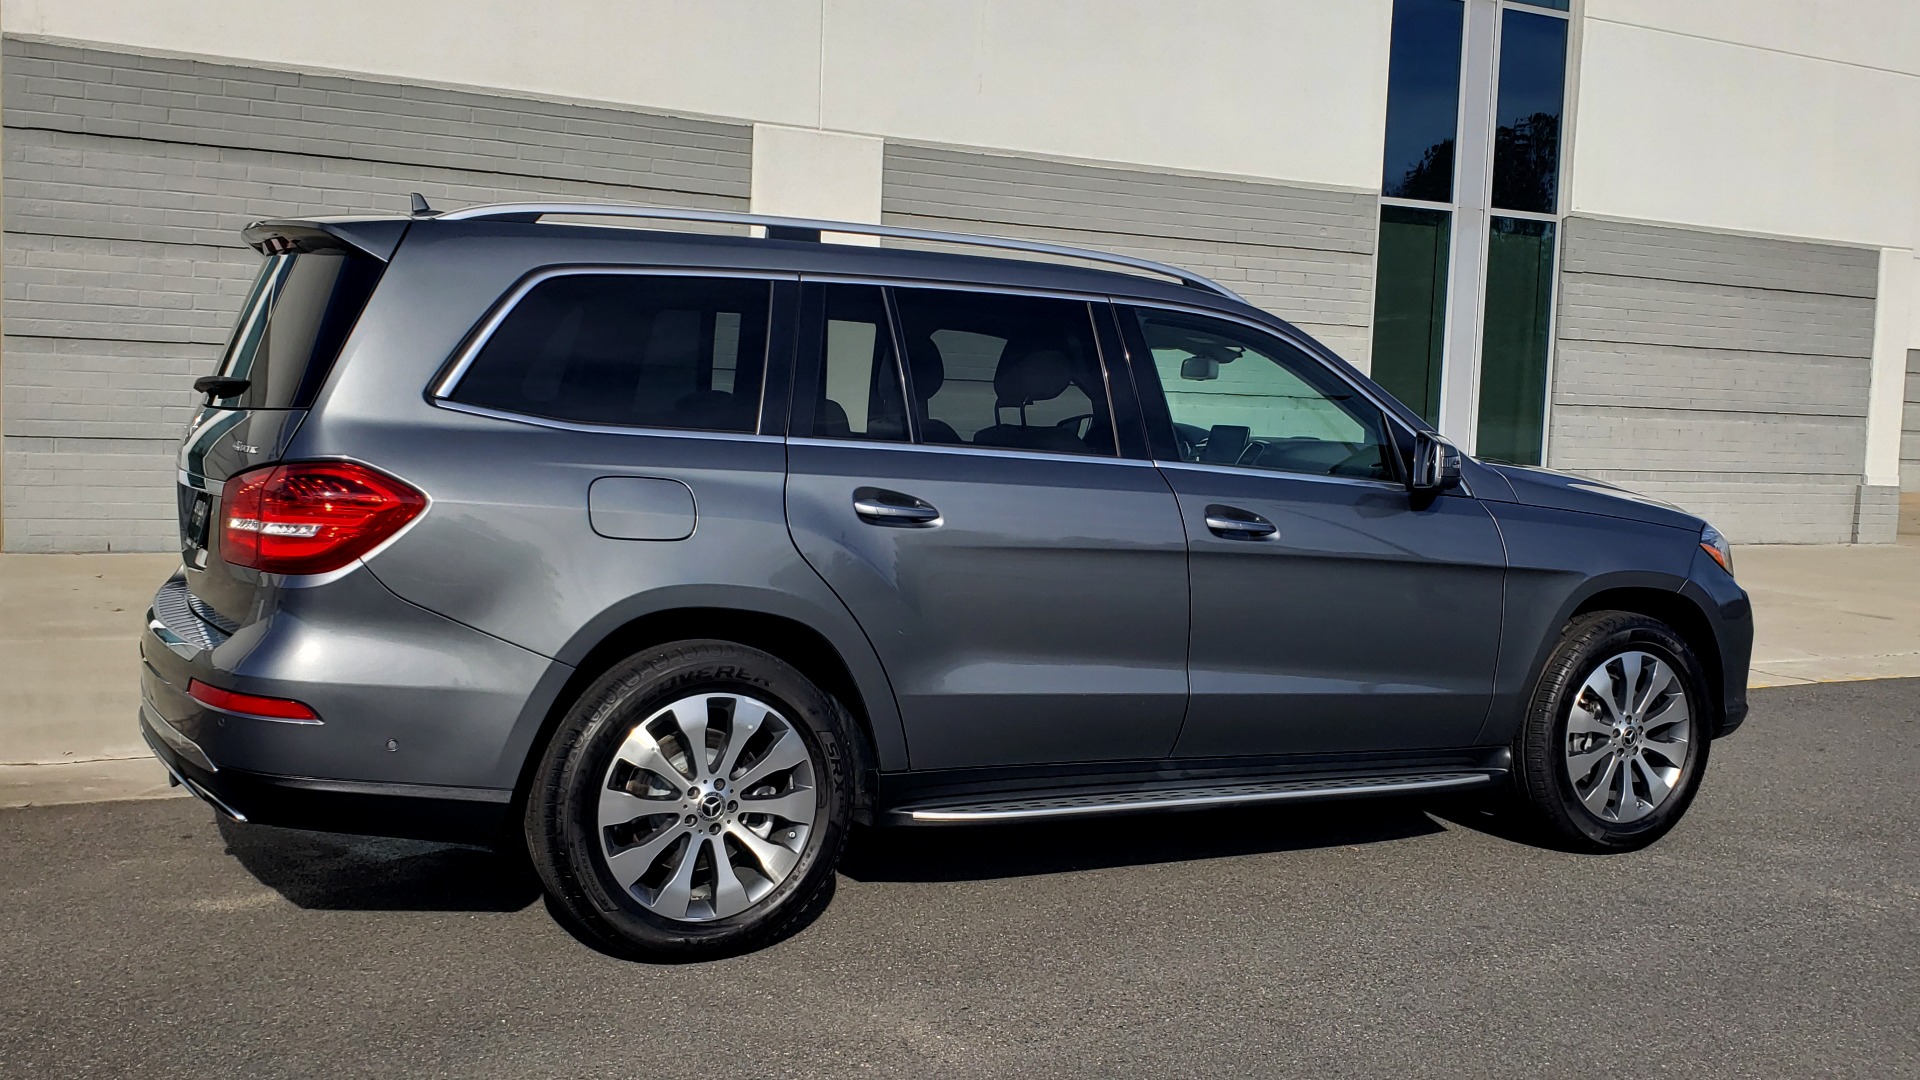 Used 2018 Mercedes-Benz GLS 450 4MATIC PREMIUM / PARK ASST / NAV / PANO-ROOF / 3-ROW / REARVIEW for sale $54,395 at Formula Imports in Charlotte NC 28227 8